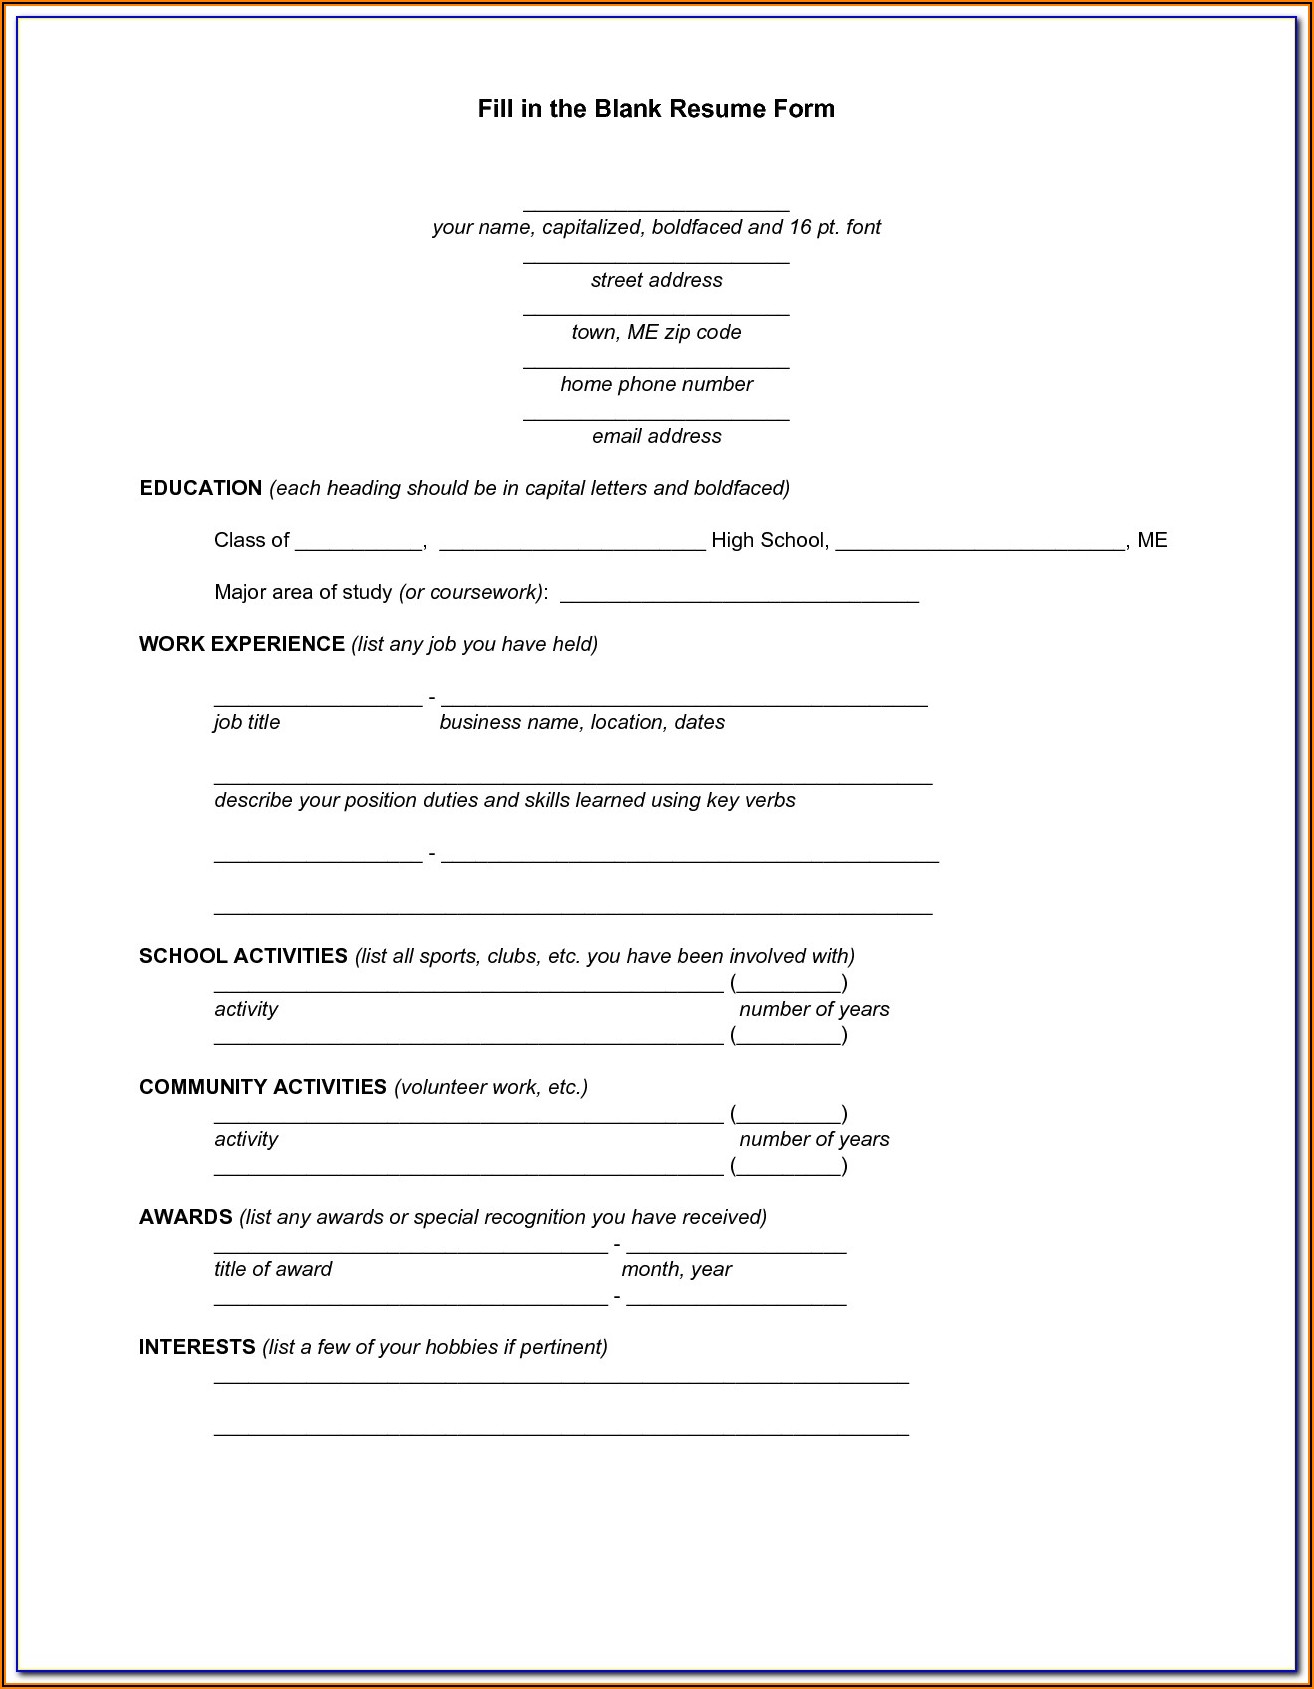 Fill In The Blank Resume Template